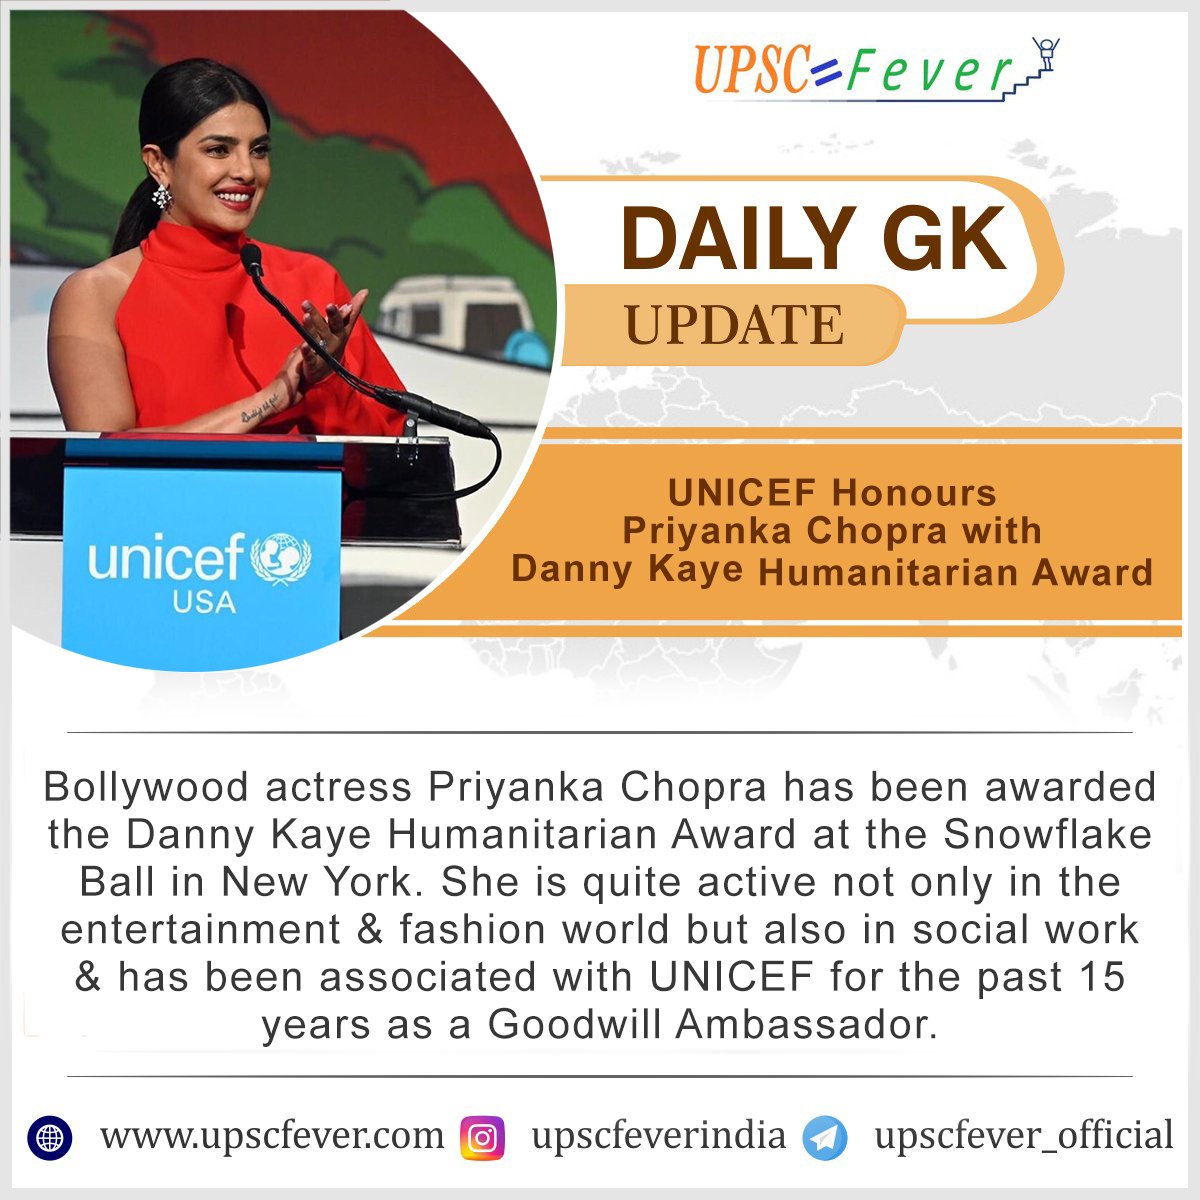 'Giving Back is No longer a Choice. Giving Back has to be a Way of Life'
#PriyankaChopra said after accepting the #DannyKayeAward

@upscfever 

#upscfever #UNICEF #DannyKayeAward #HumanitarianAward #UnitedNationsChildrensFund #GoodwillAmbassador #gkupdate #currentaffairs #dailygk